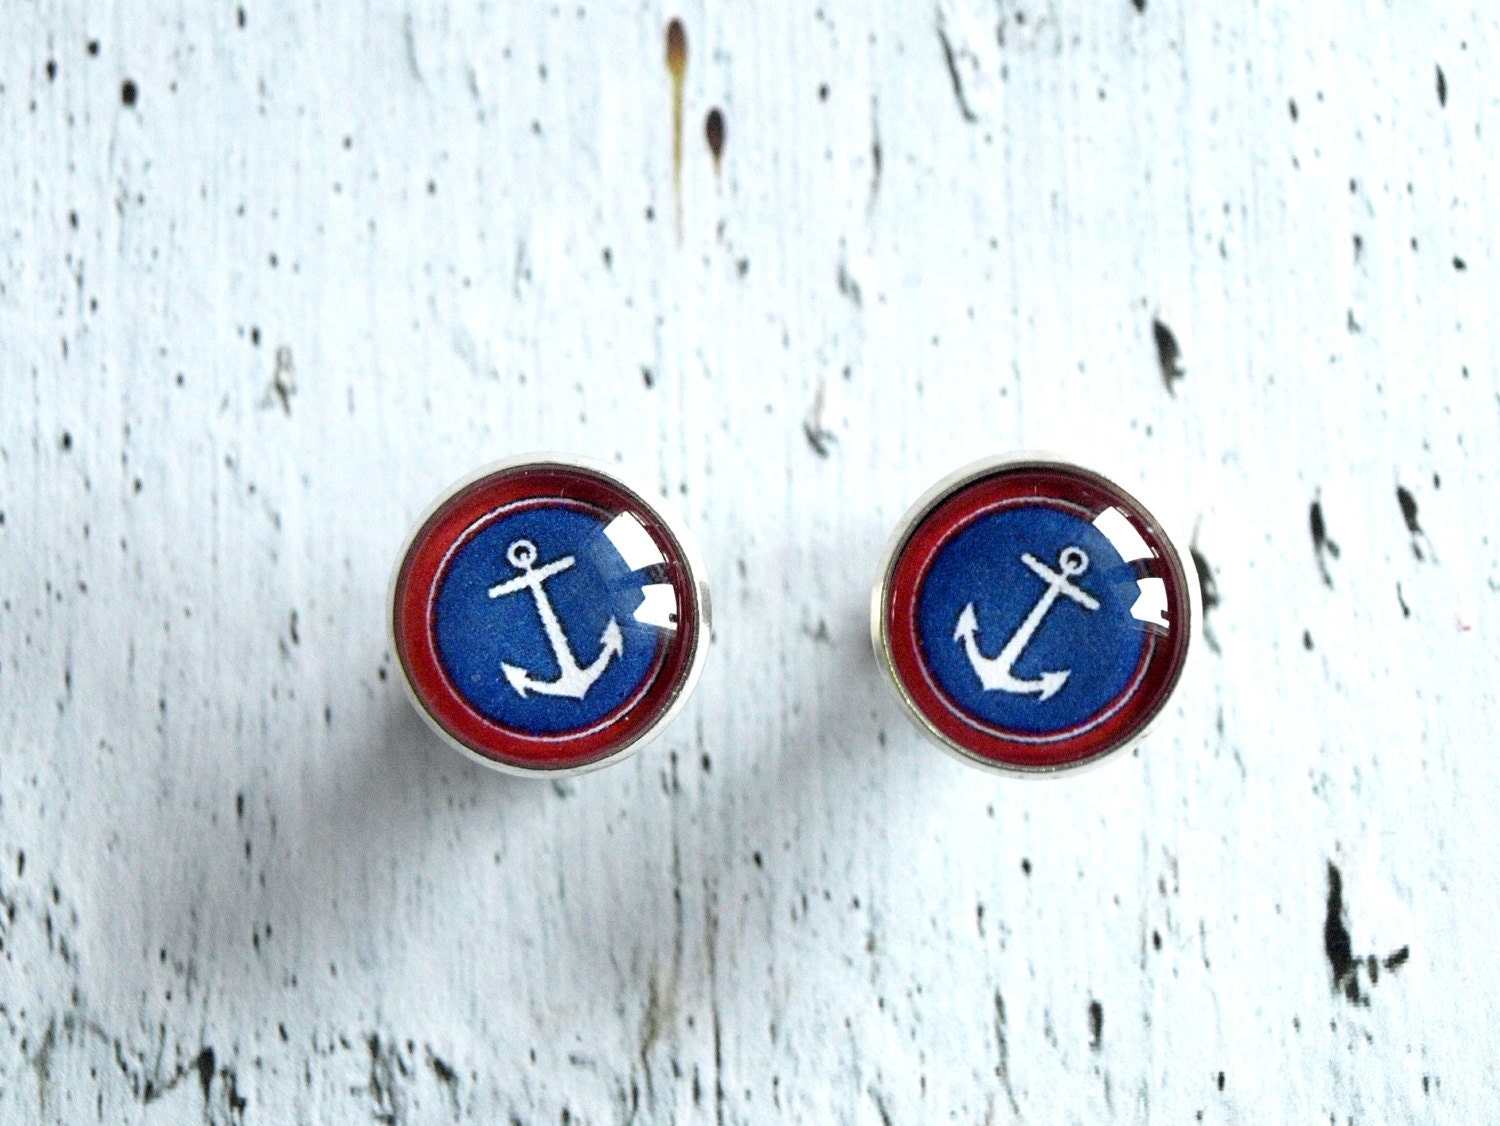 Anchor studs earrings white blue red -  Nautical jewelry - cute ear studs post - glass dome anchor earrings - anchor jewelry - ShoShanaArt